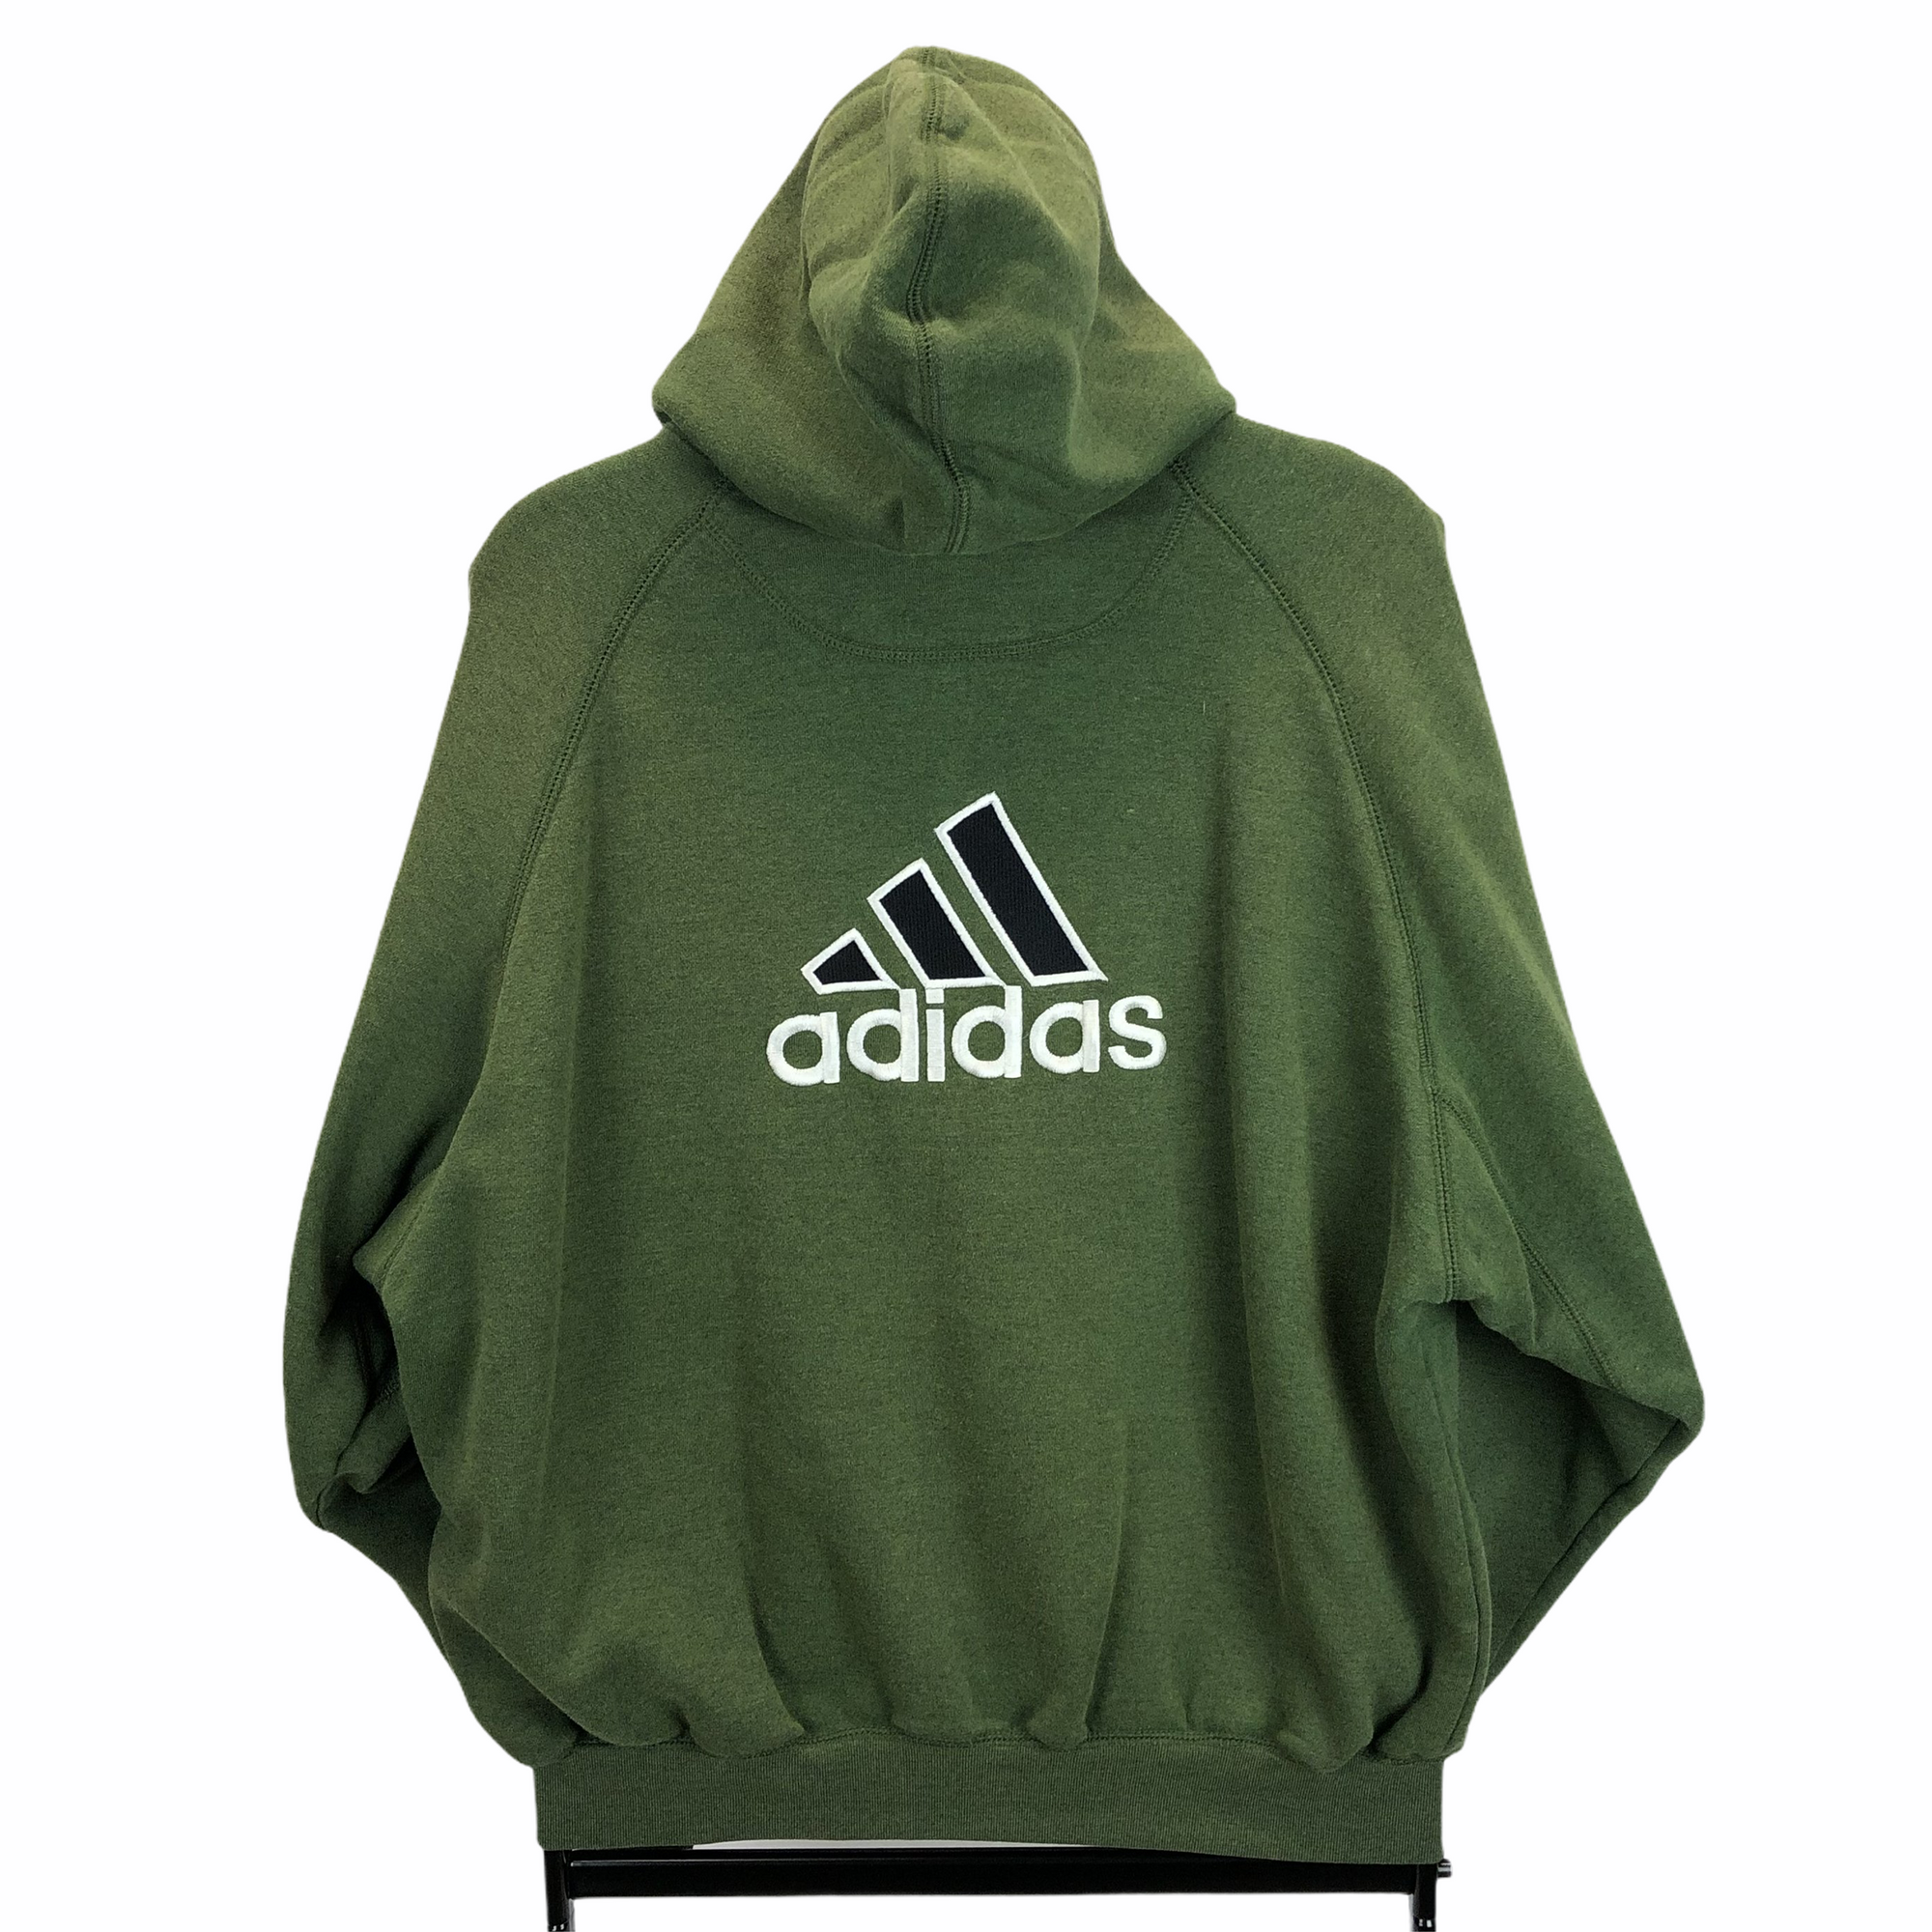 Vintage 90s Adidas Zip Up Hoodie in Forest Green - Men's Large/Women's XL